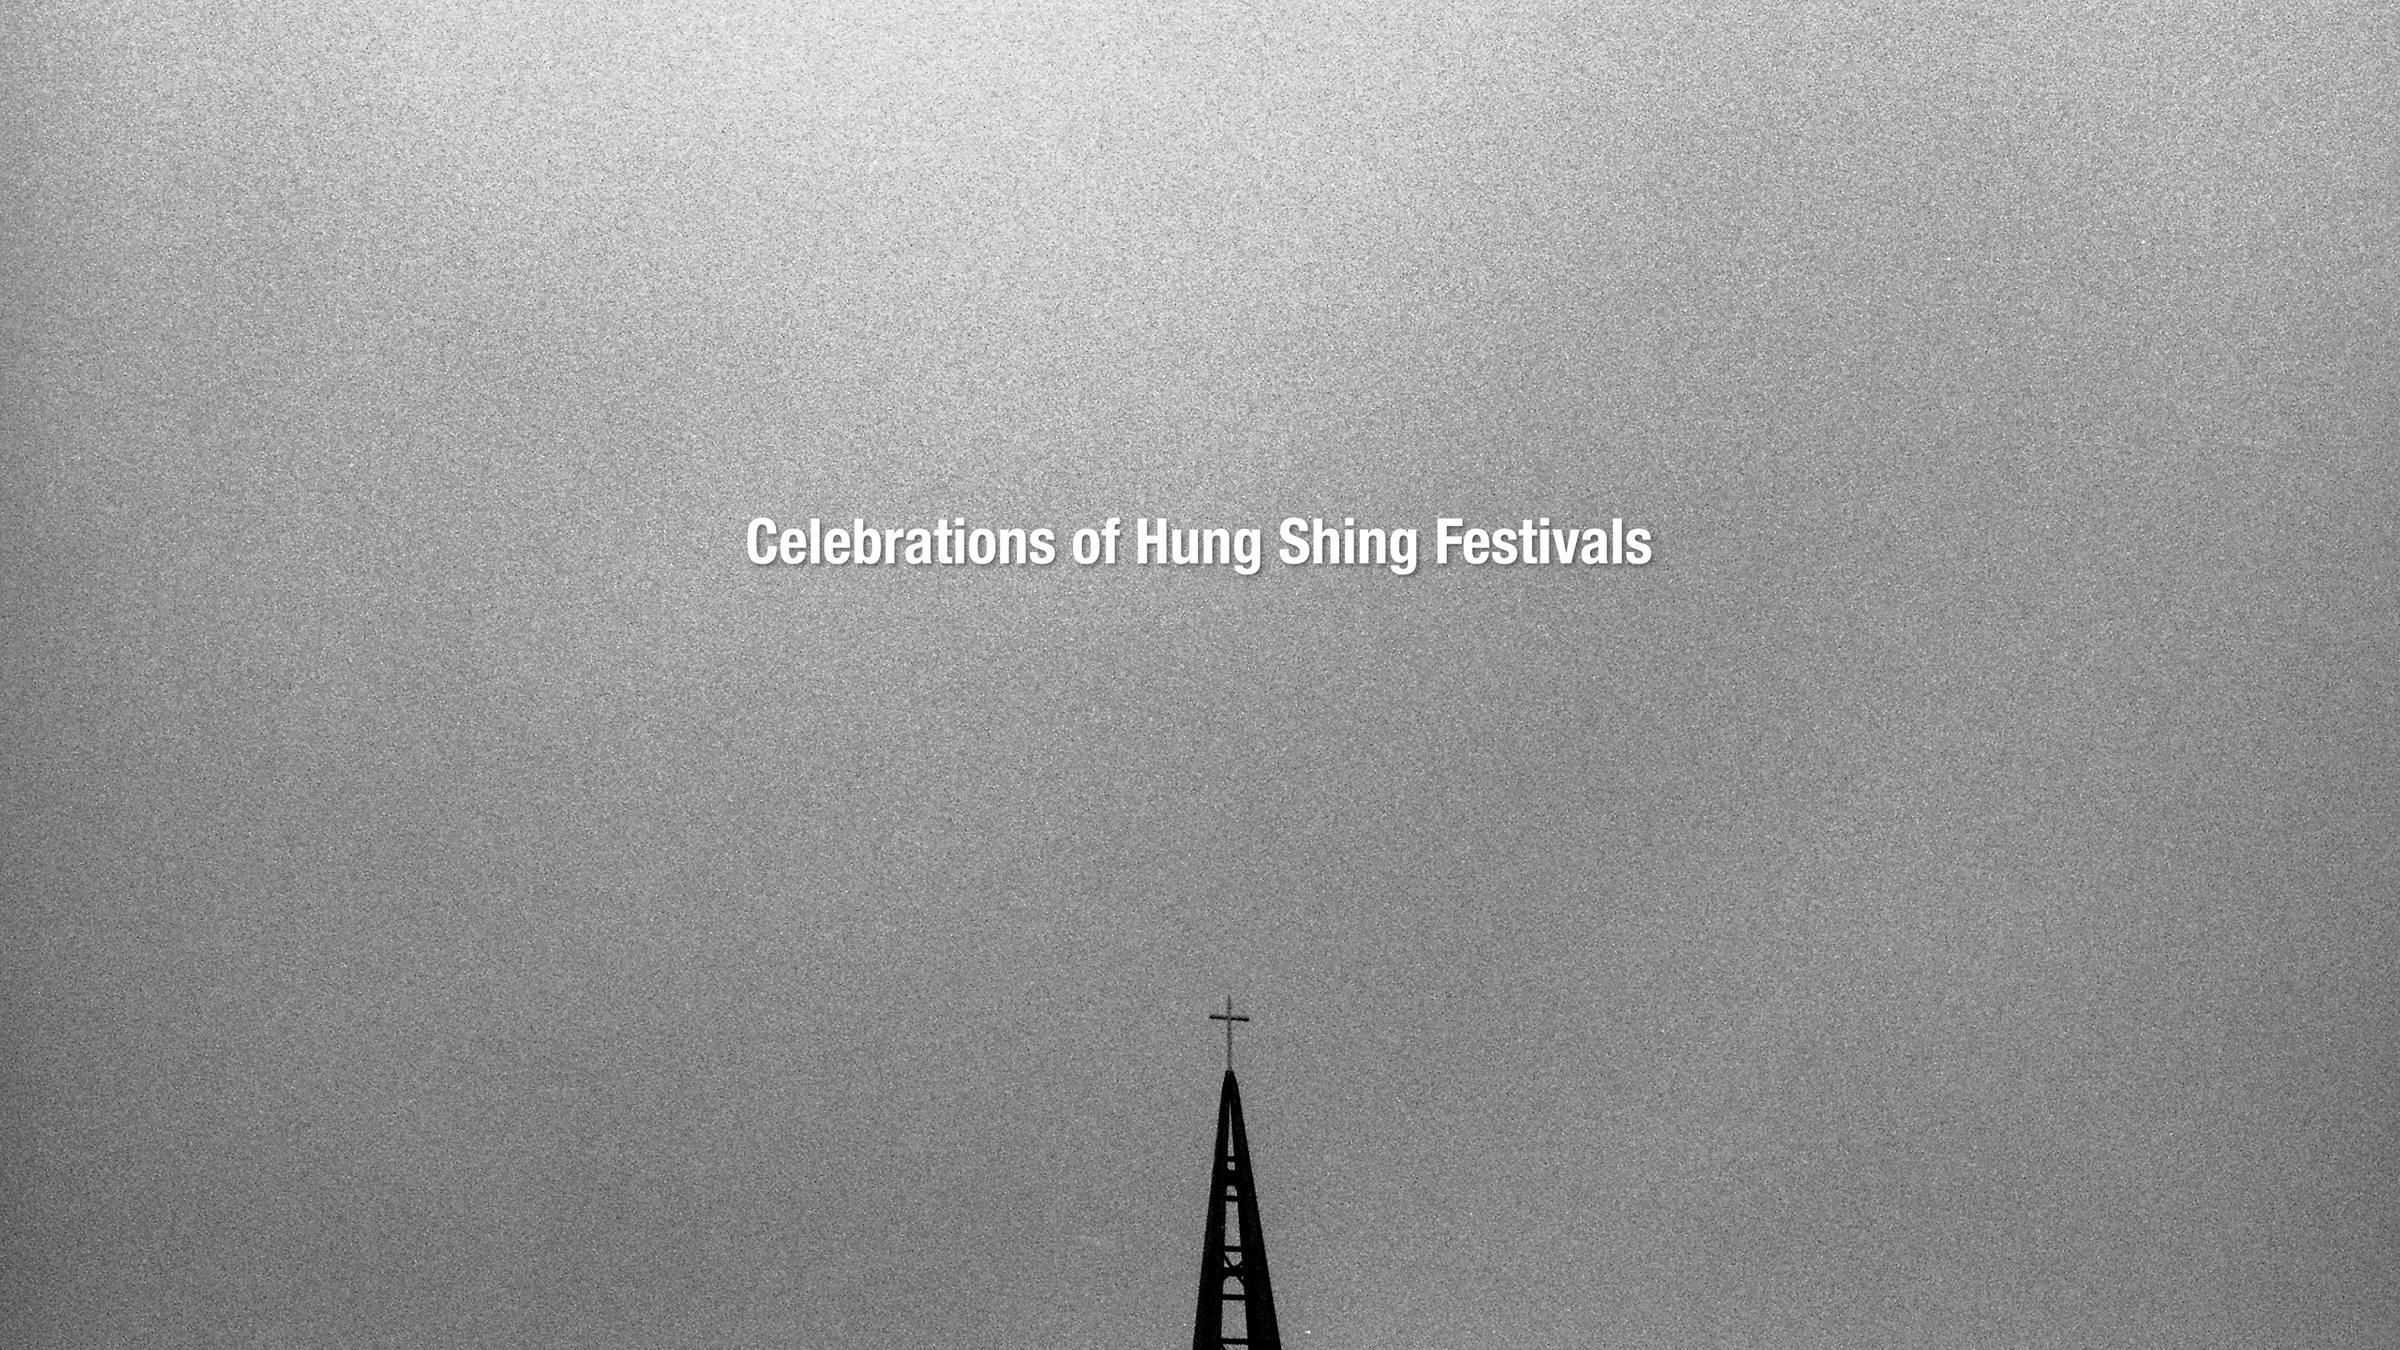 Black and white mage of a sky with the top of a church spire in it. The words 'Celebrations of Hung Shing Festivals' are superimposed on top.